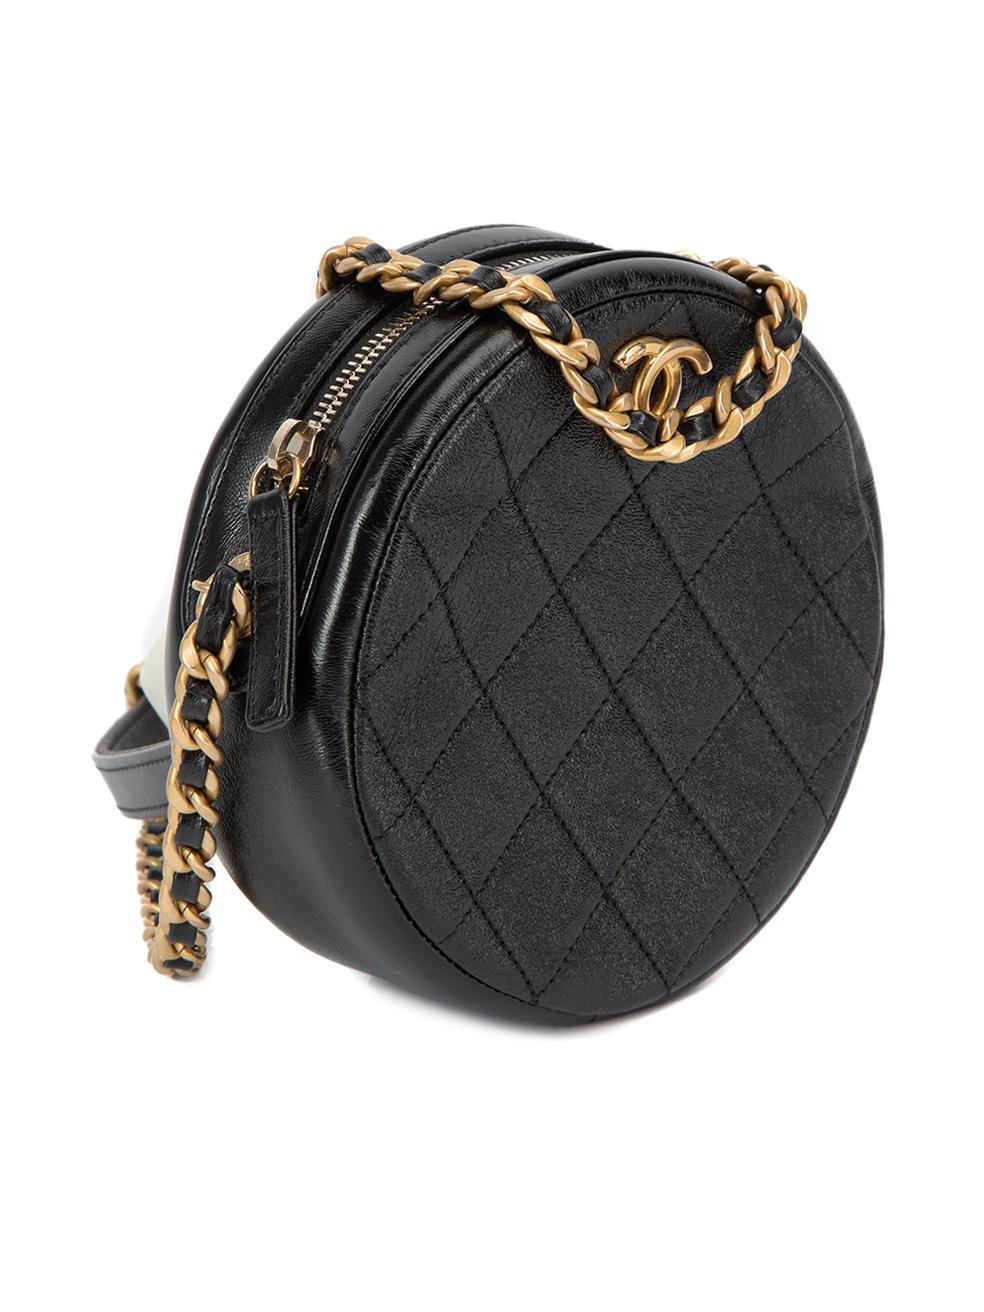 CONDITION is Very good. Minimal wear to bag is evident. Minimal wear to the gold hardware on this used Chanel designer resale item. This item comes with original box and dustbag.  Details  Black Leather Round bag Quilted 1x Chainlink leather